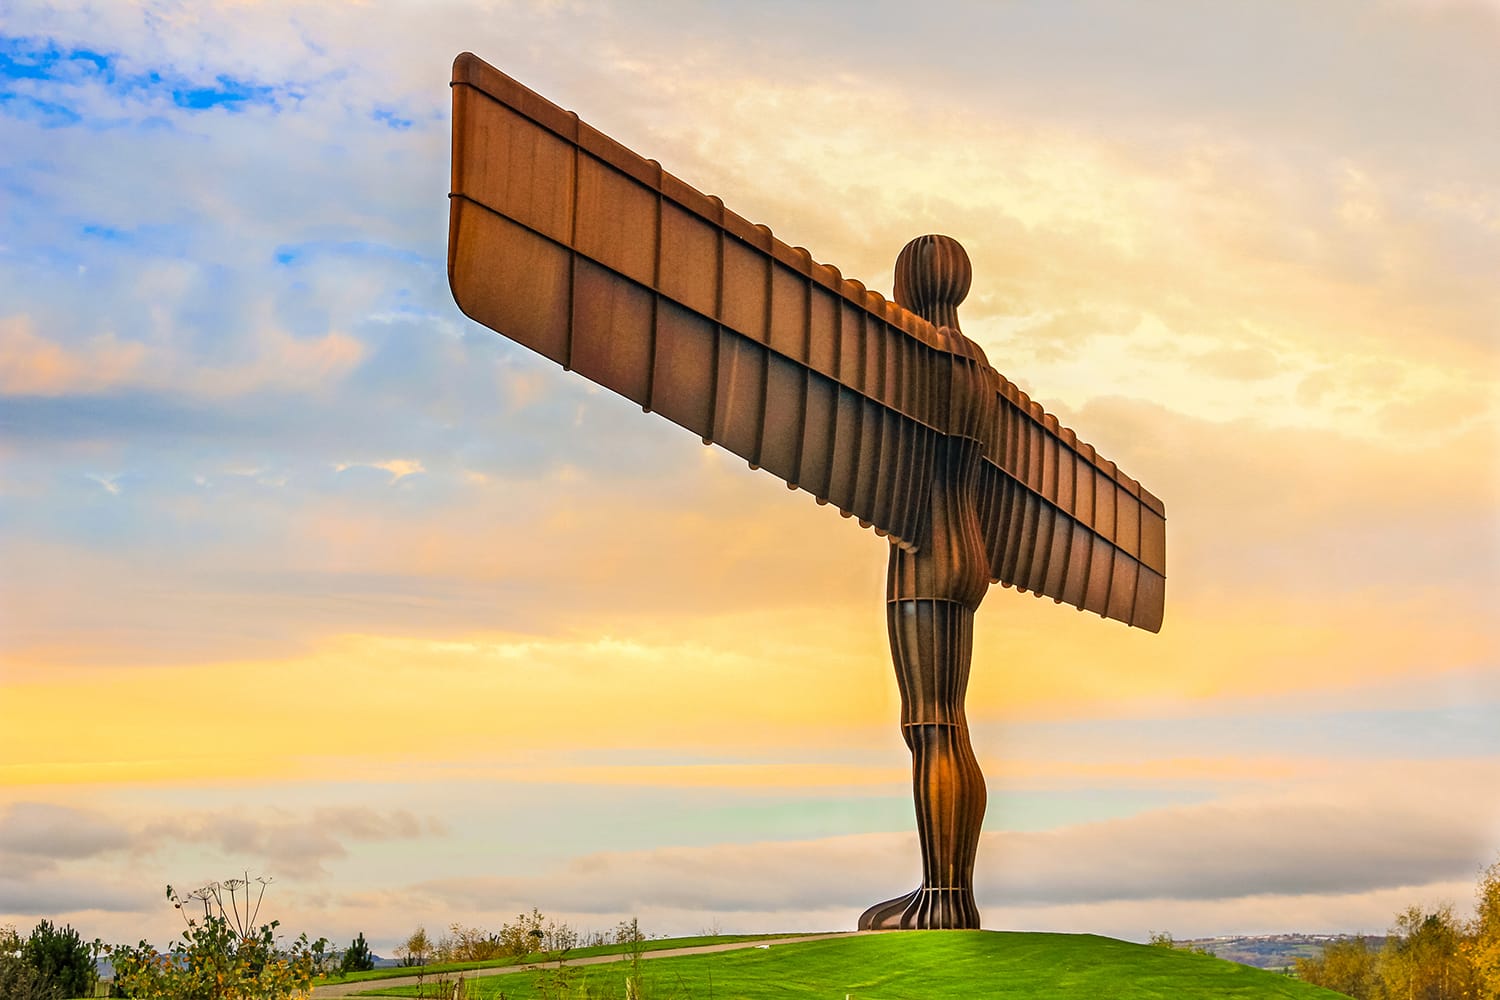 The angel of the north a steel sculpture stand alone in autumn season at Gateshead, Newcastle Upon Tyne, UK